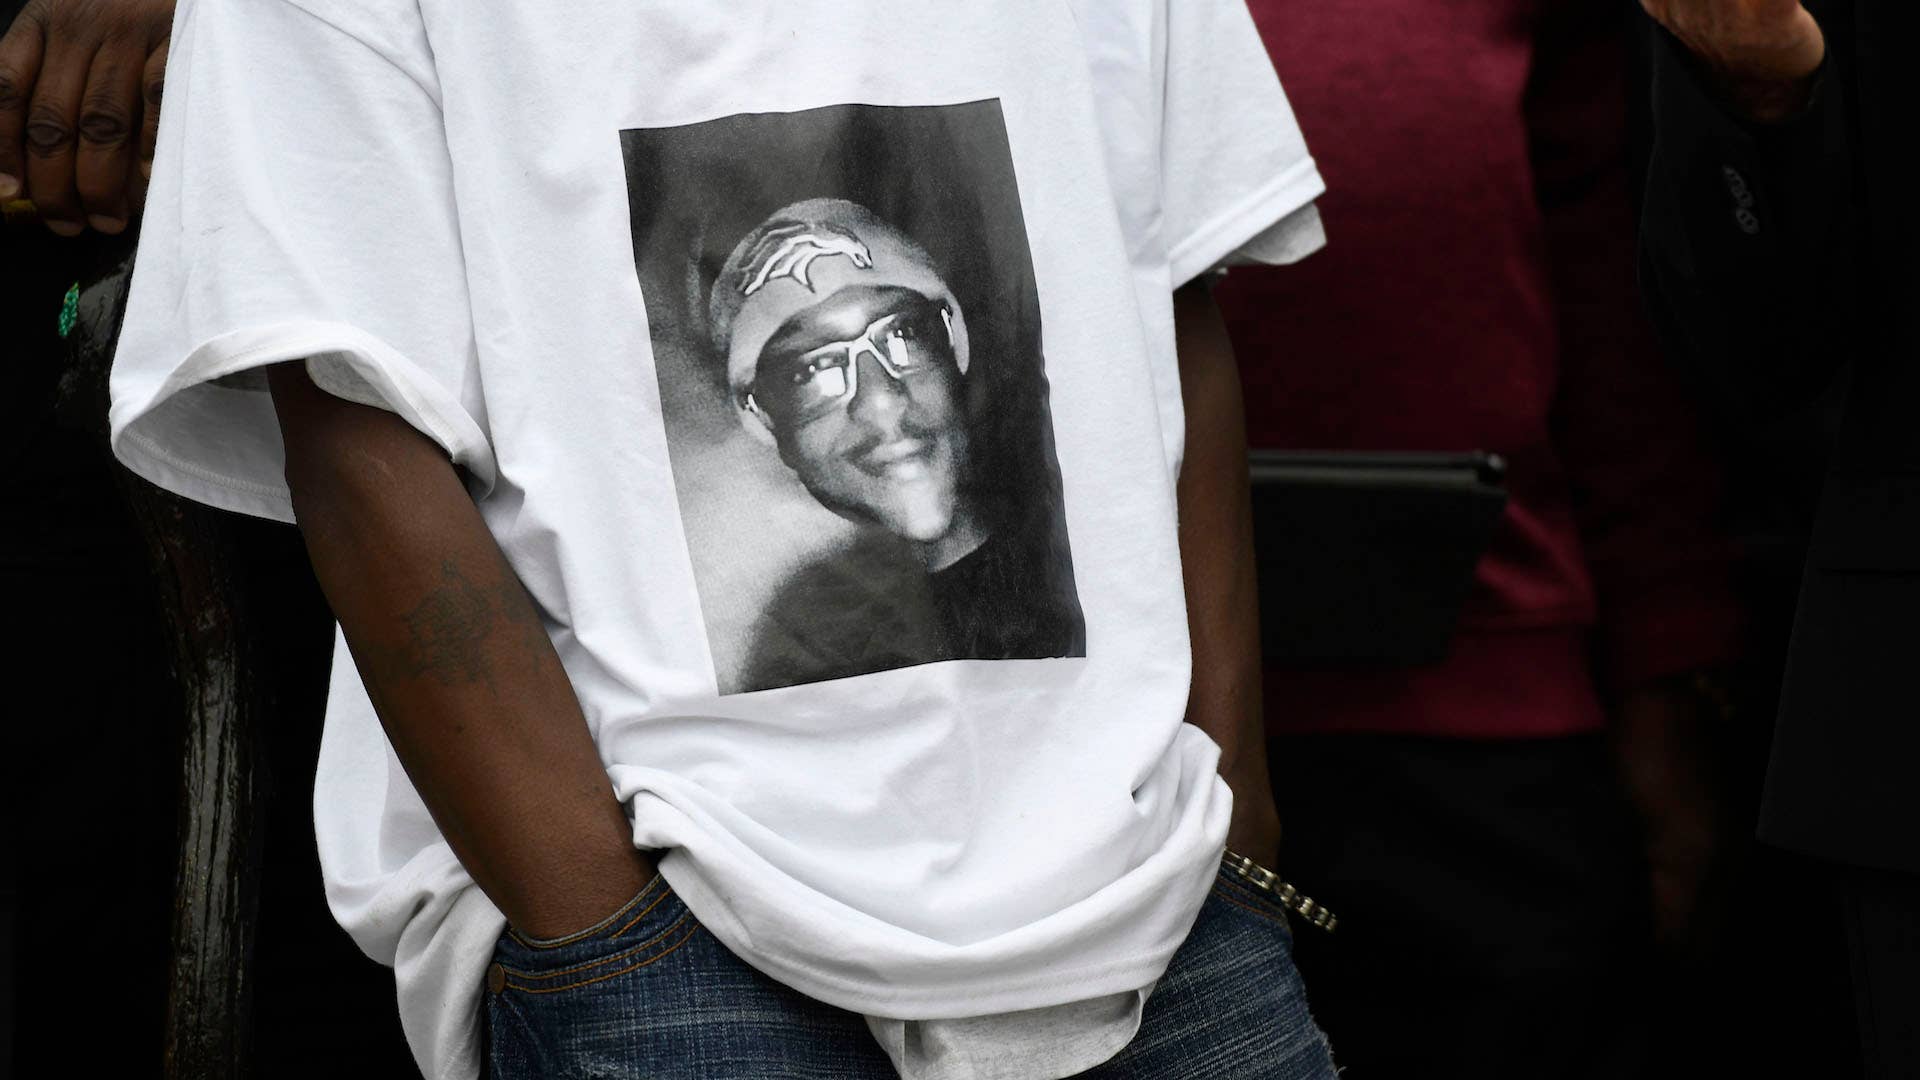 LaWayne Mosley, father of Elijah McClain, wears a t shirt with is son's picture on it.